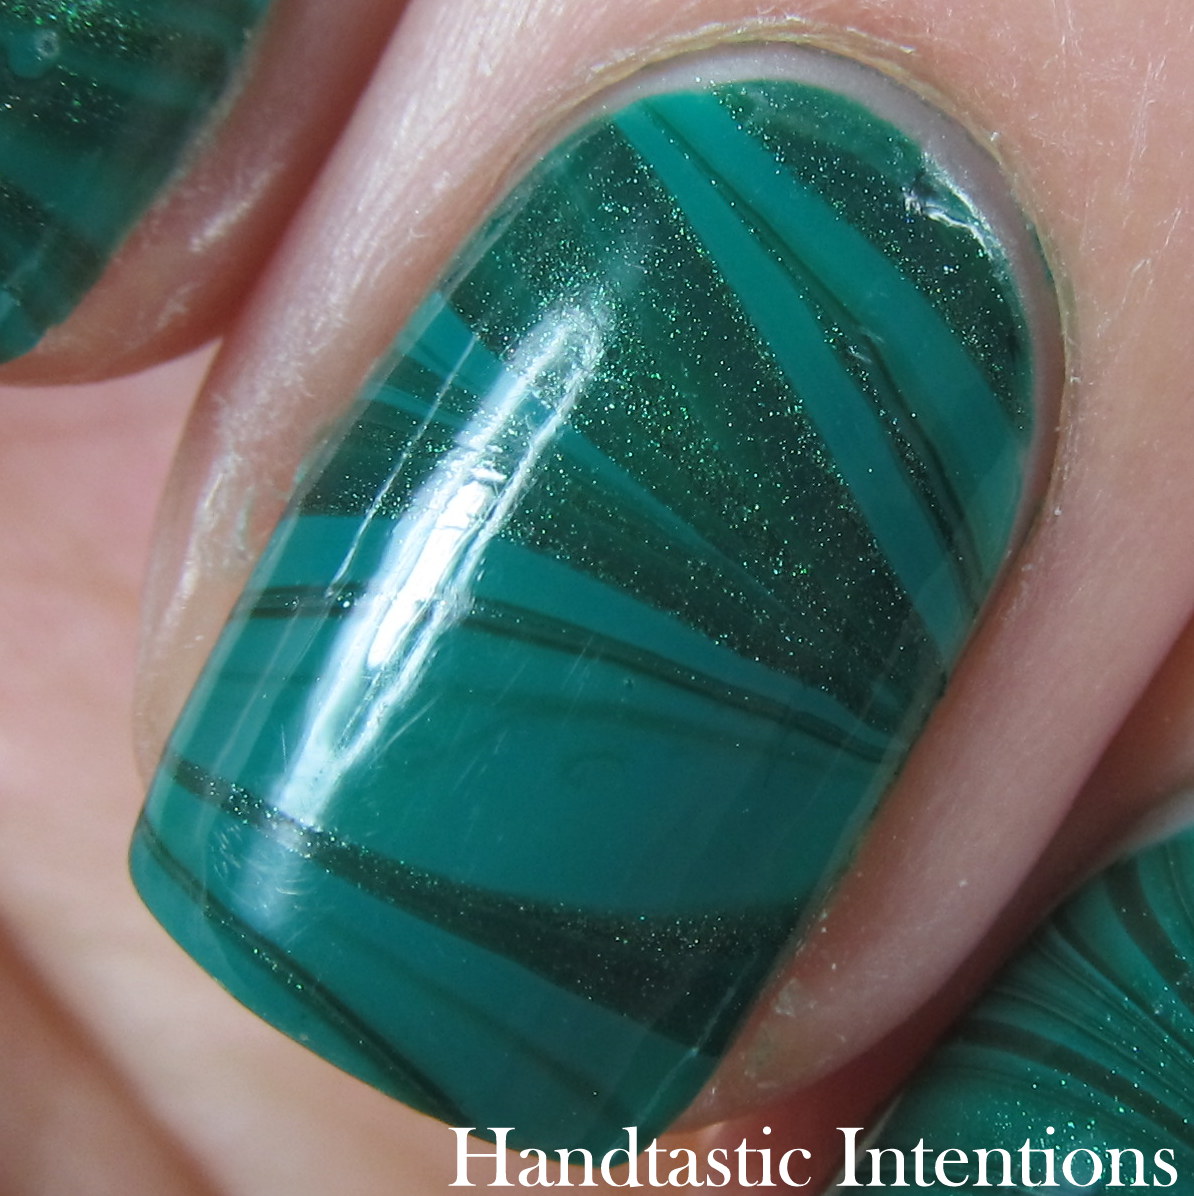 Handtastic Intentions: One More Saint Patrick's Day Nail Art Design